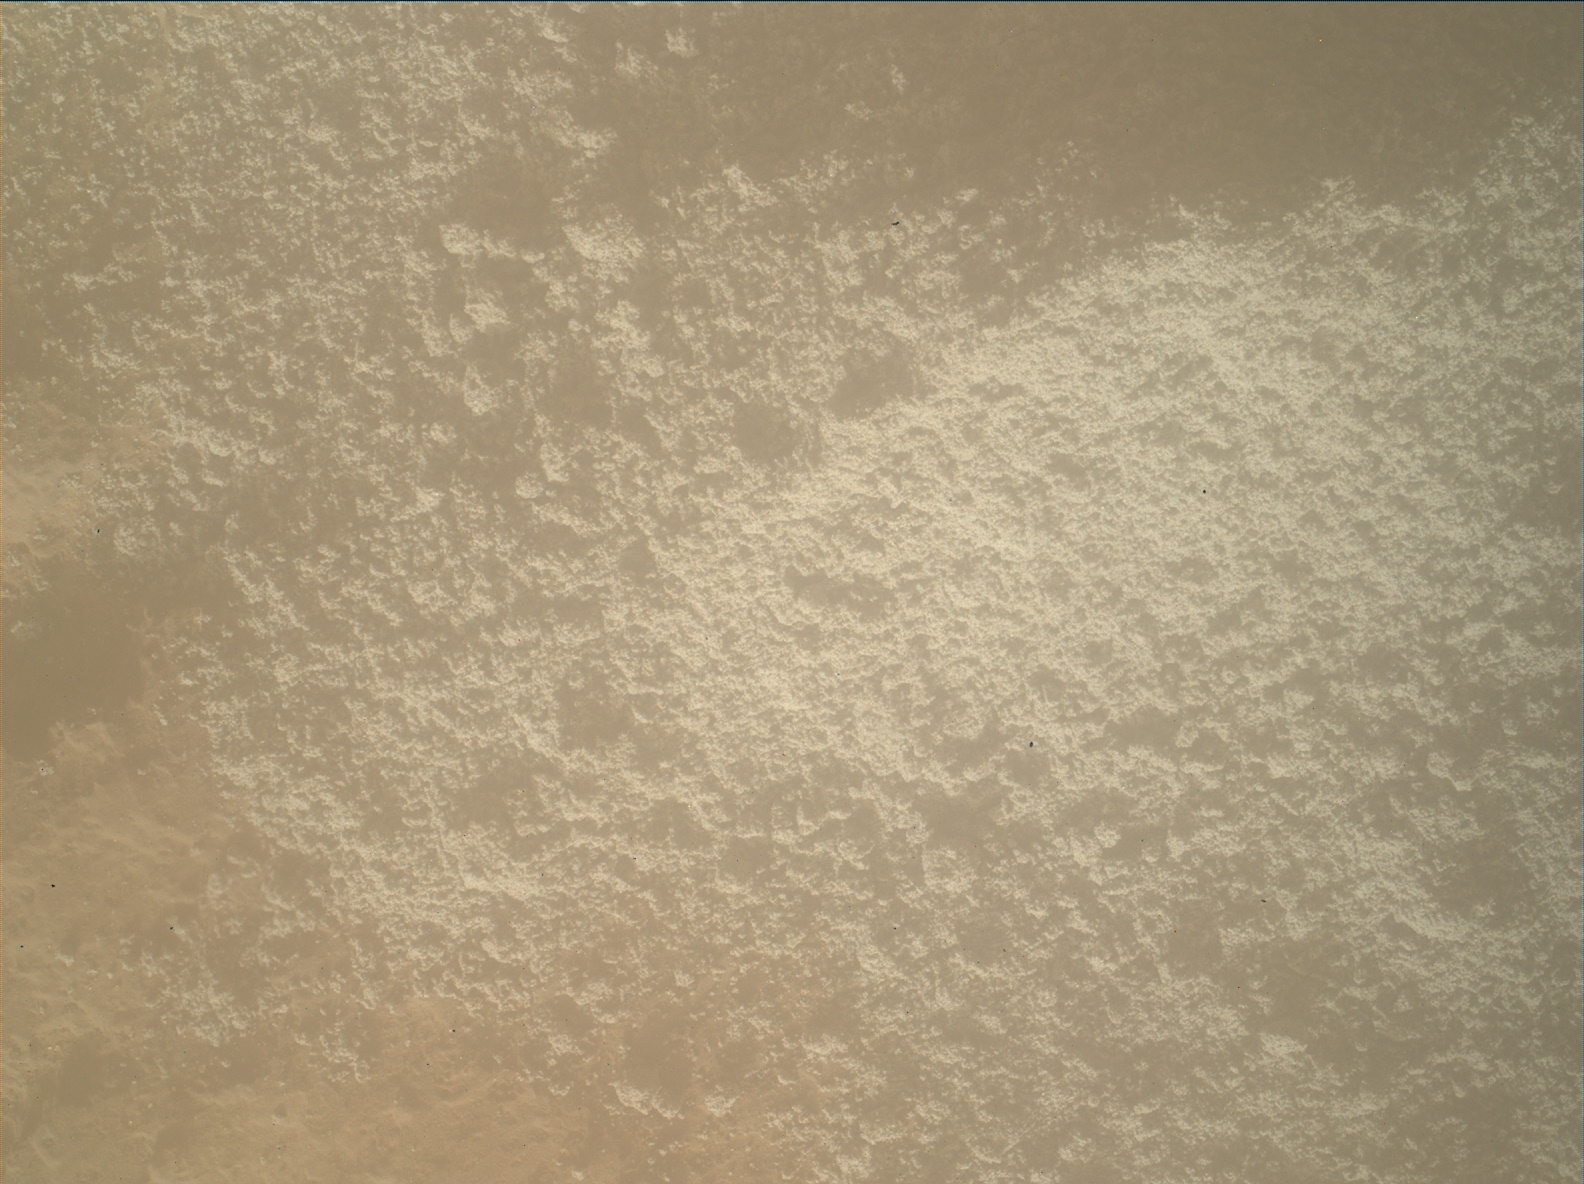 Nasa's Mars rover Curiosity acquired this image using its Mars Hand Lens Imager (MAHLI) on Sol 1204